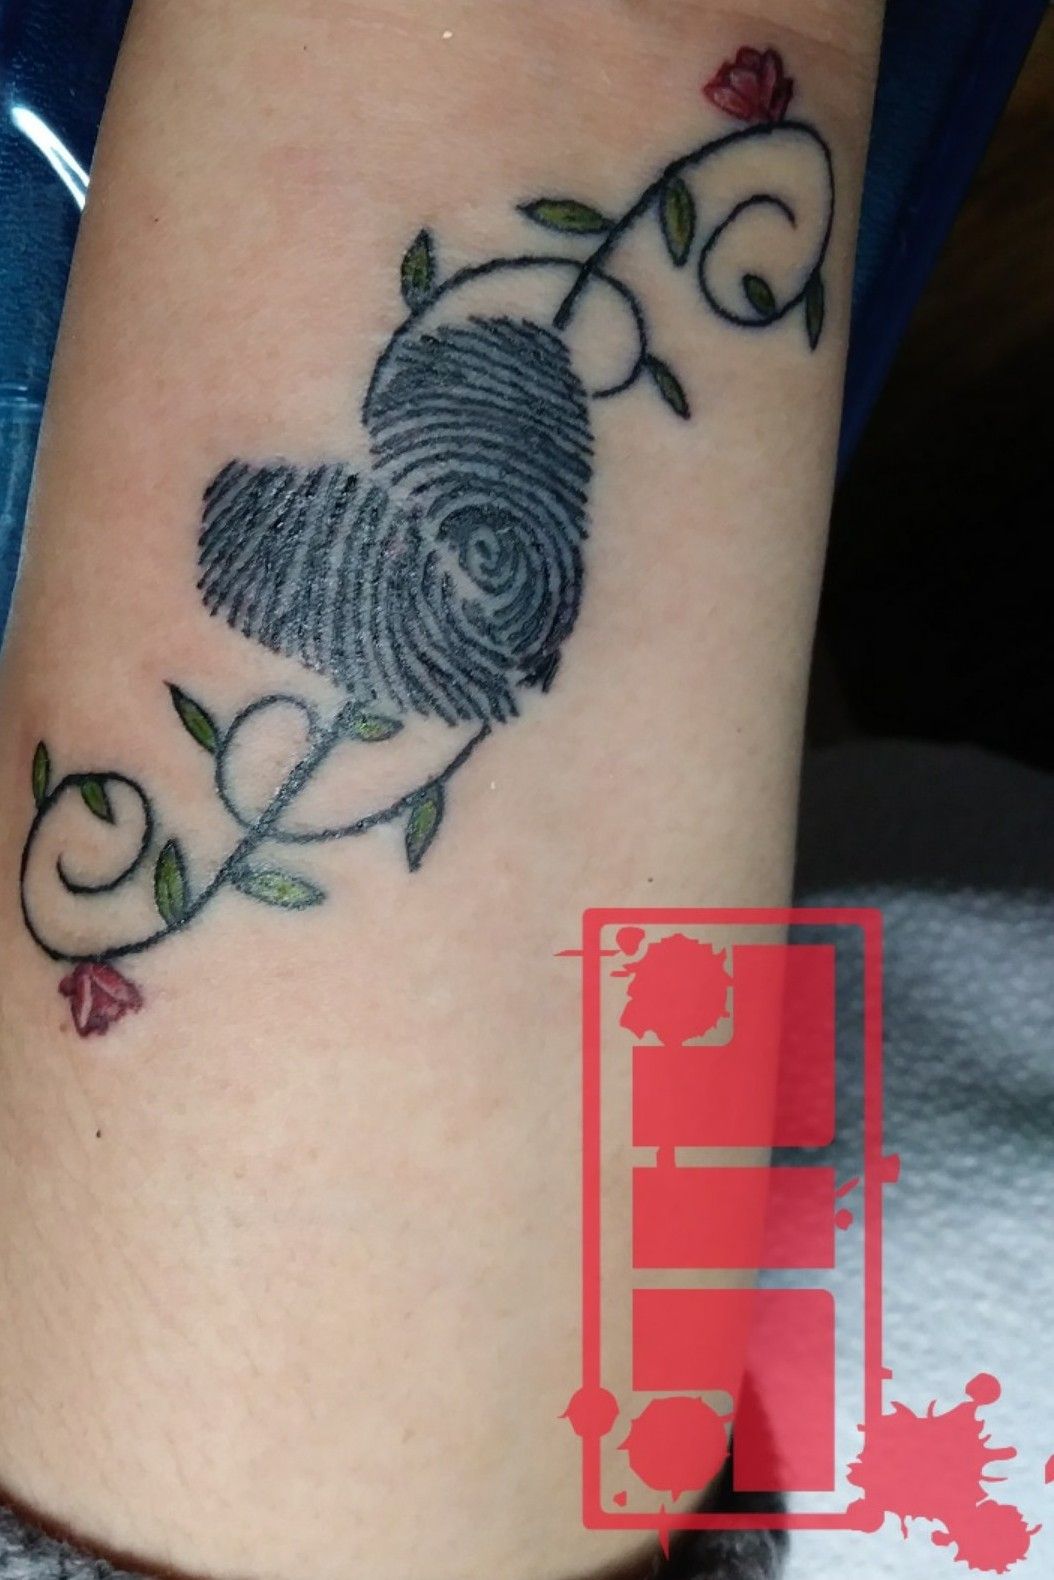 Out of Town Tattoo  Memorial fingerprint tattoo done today by Jessi  Thanks Suzanne for folks interested in fingerprint tattoos please keep  in mind we blew up the fingerprint image and cut